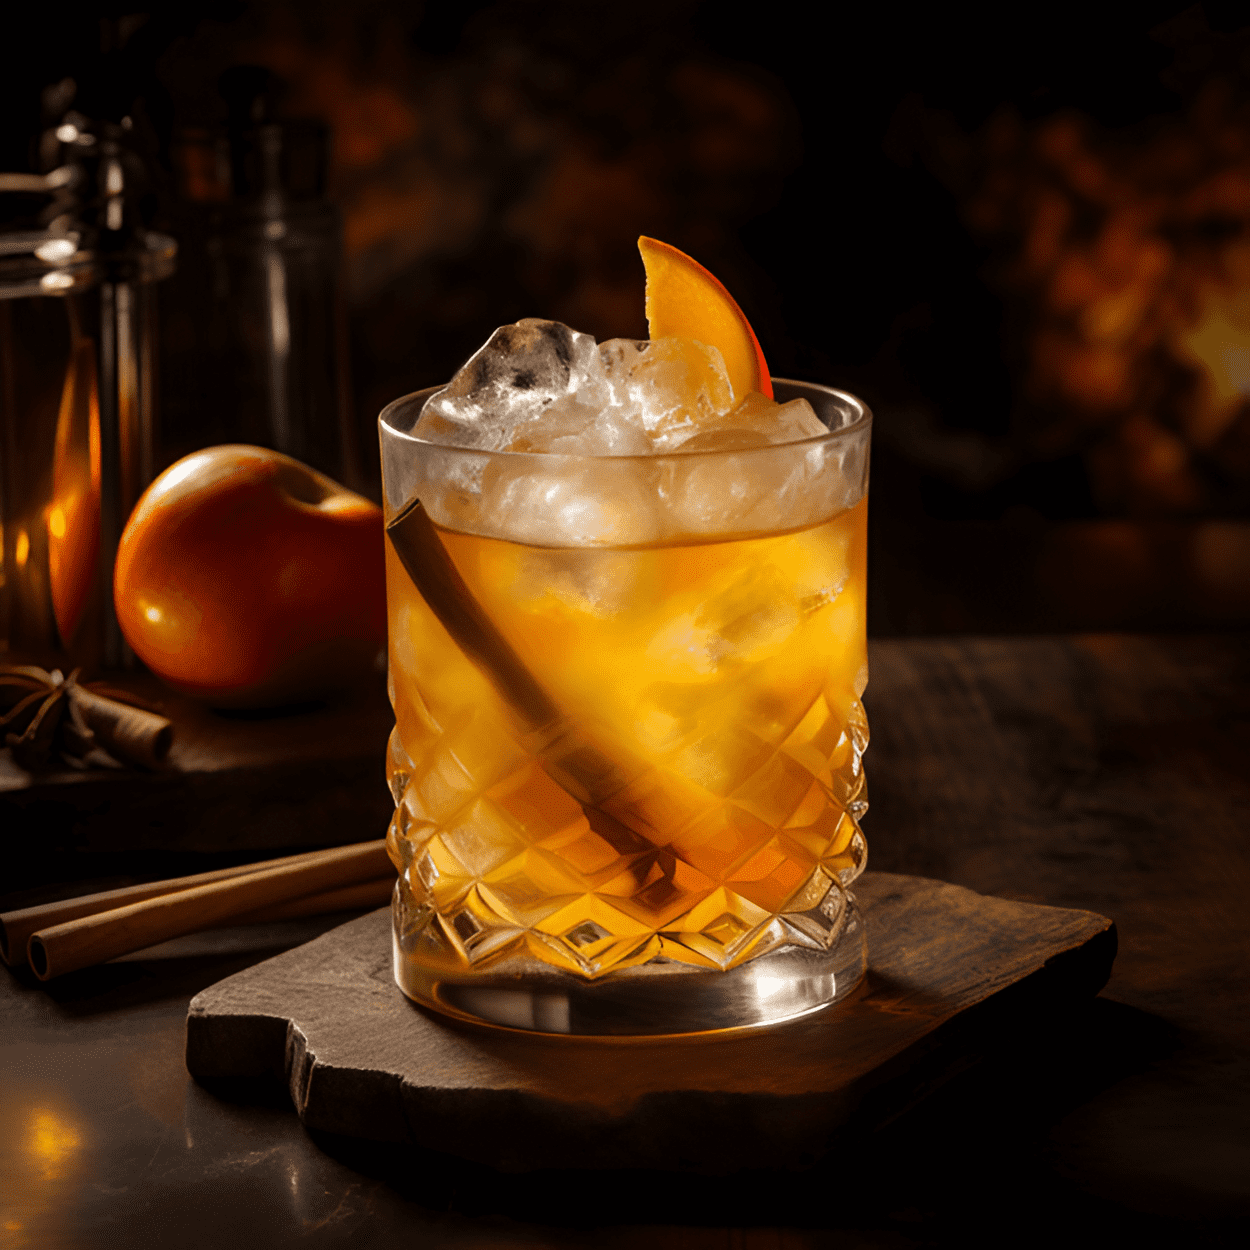 Crown Maple Cocktail Recipe - The Crown Maple cocktail is a sweet and warming drink with a hint of spice. The maple flavor of the whisky is complemented by the sweet and tangy apple cider, while the cinnamon adds a touch of warmth and spice.